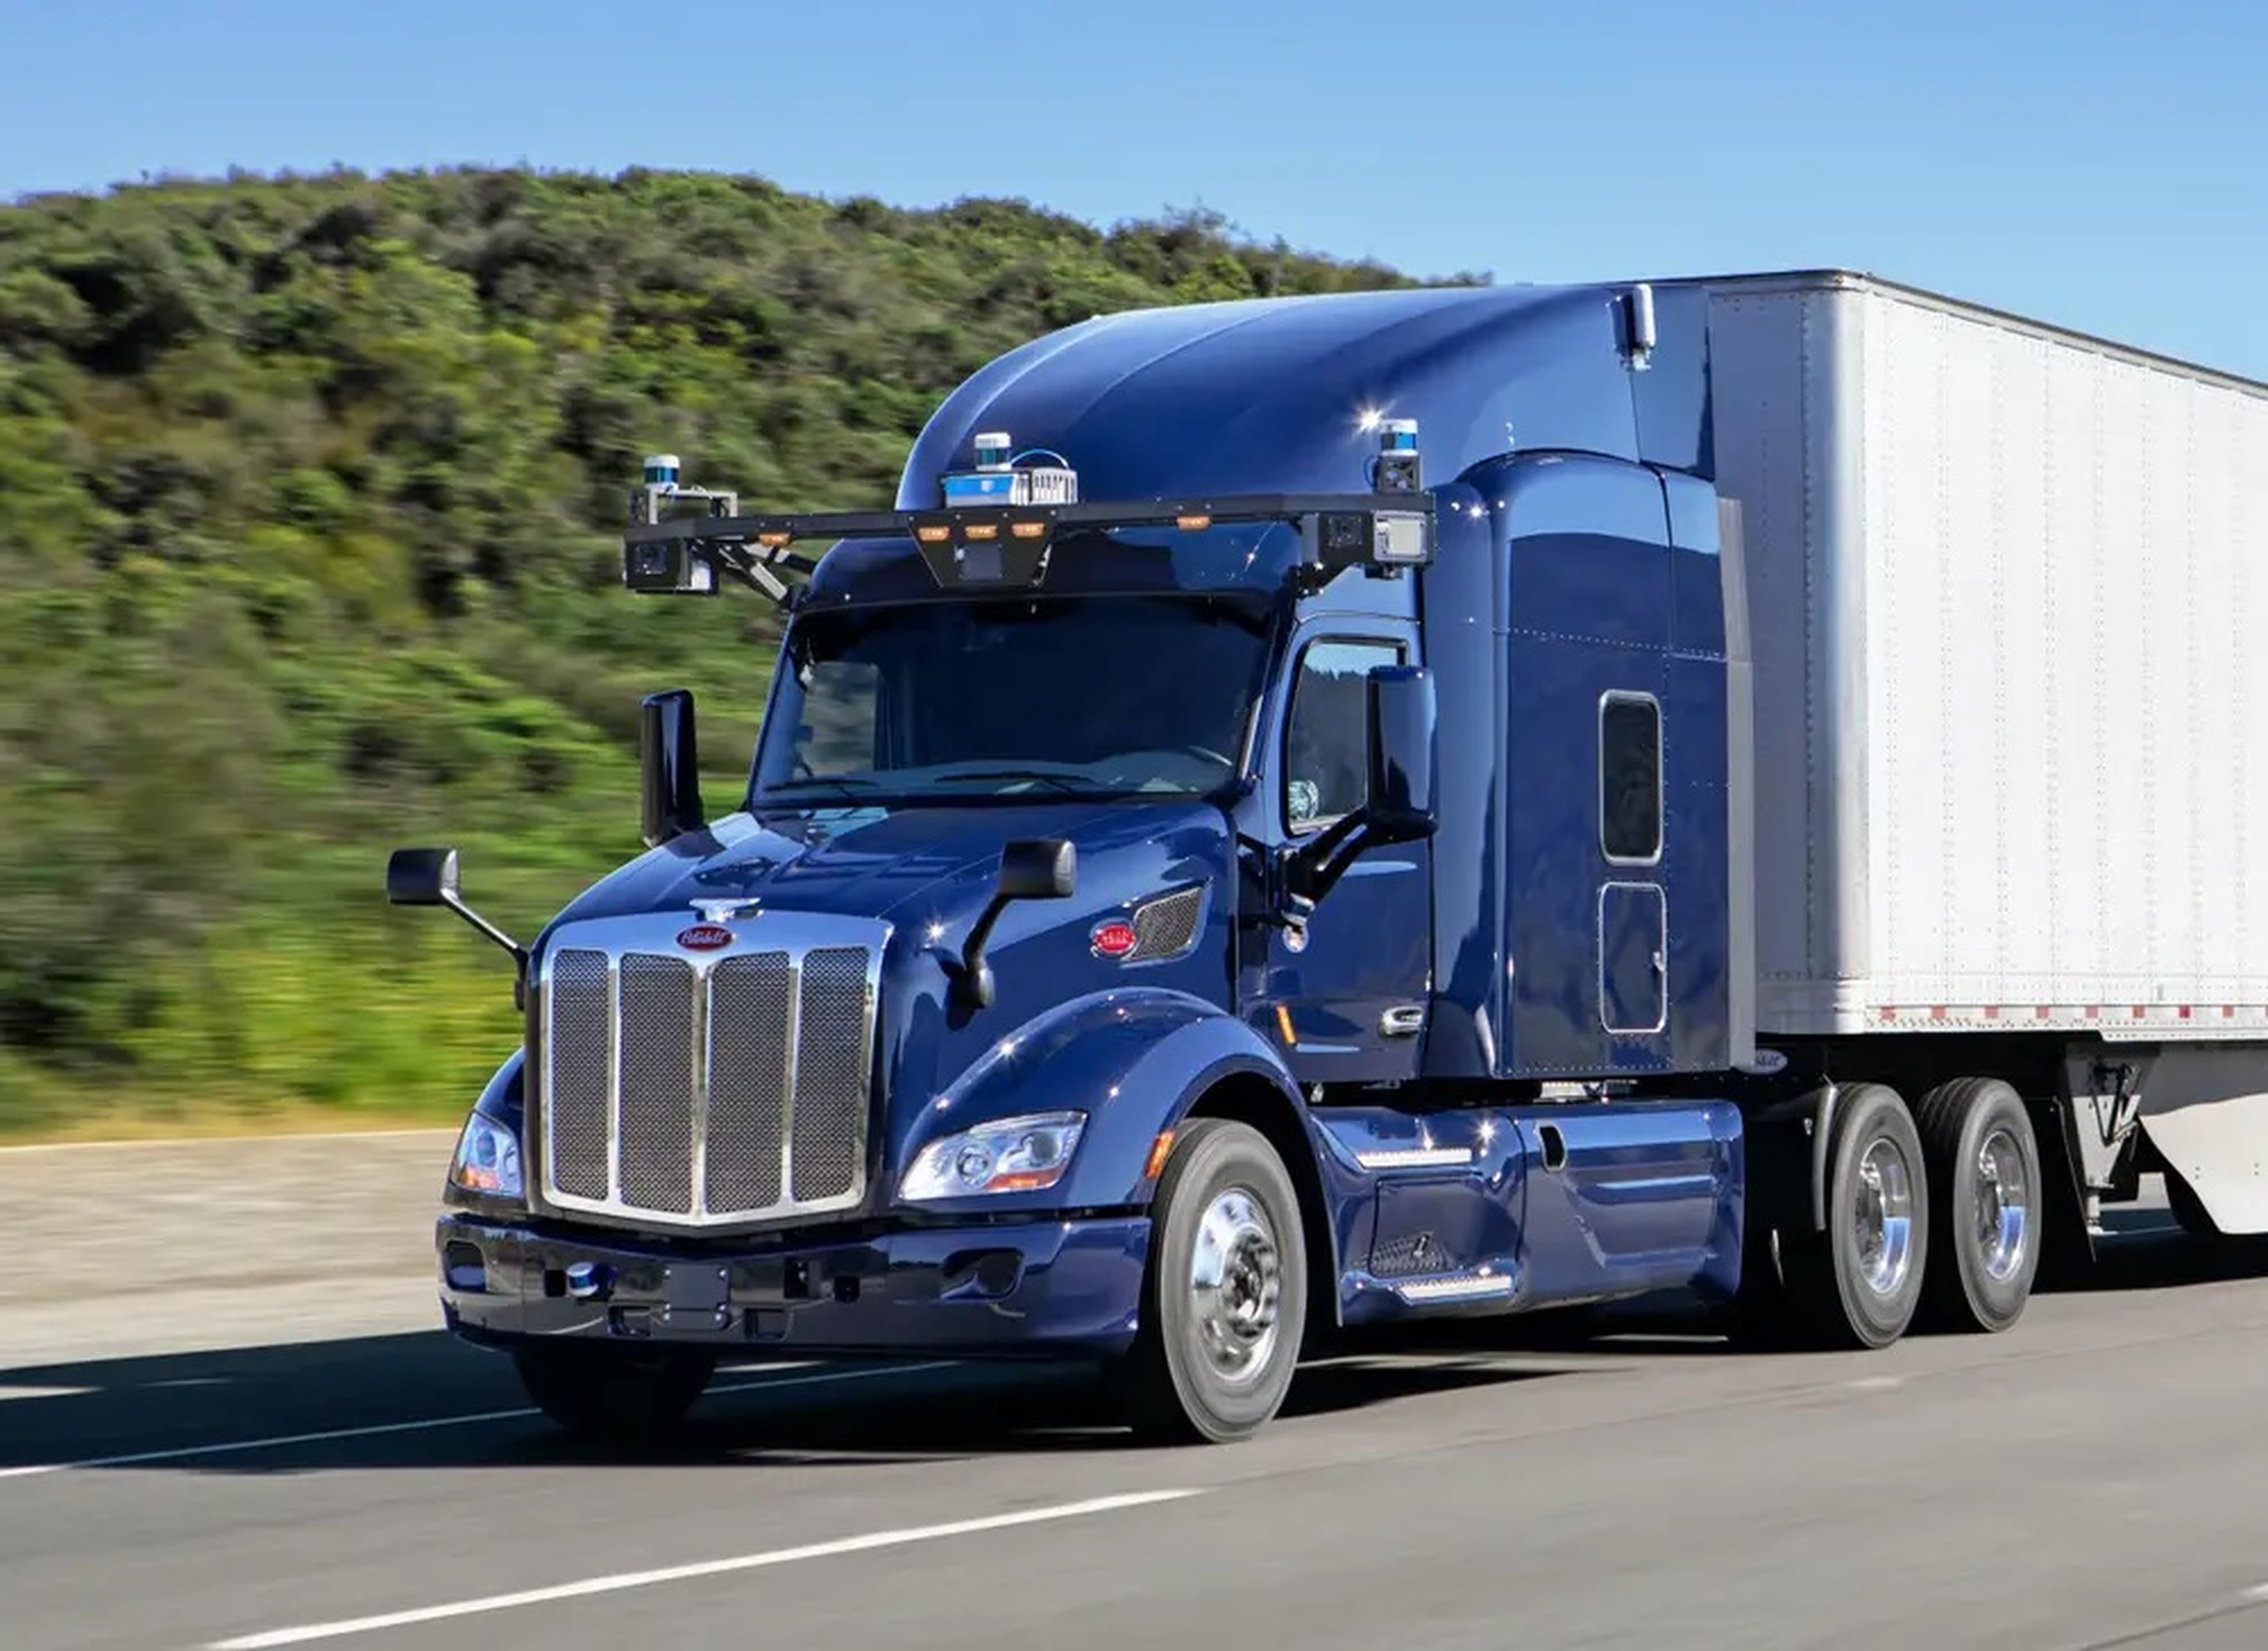 Aurora and Paccar will work together to develop, test, and sell self-driving big rigs, the firms announced Tuesday.